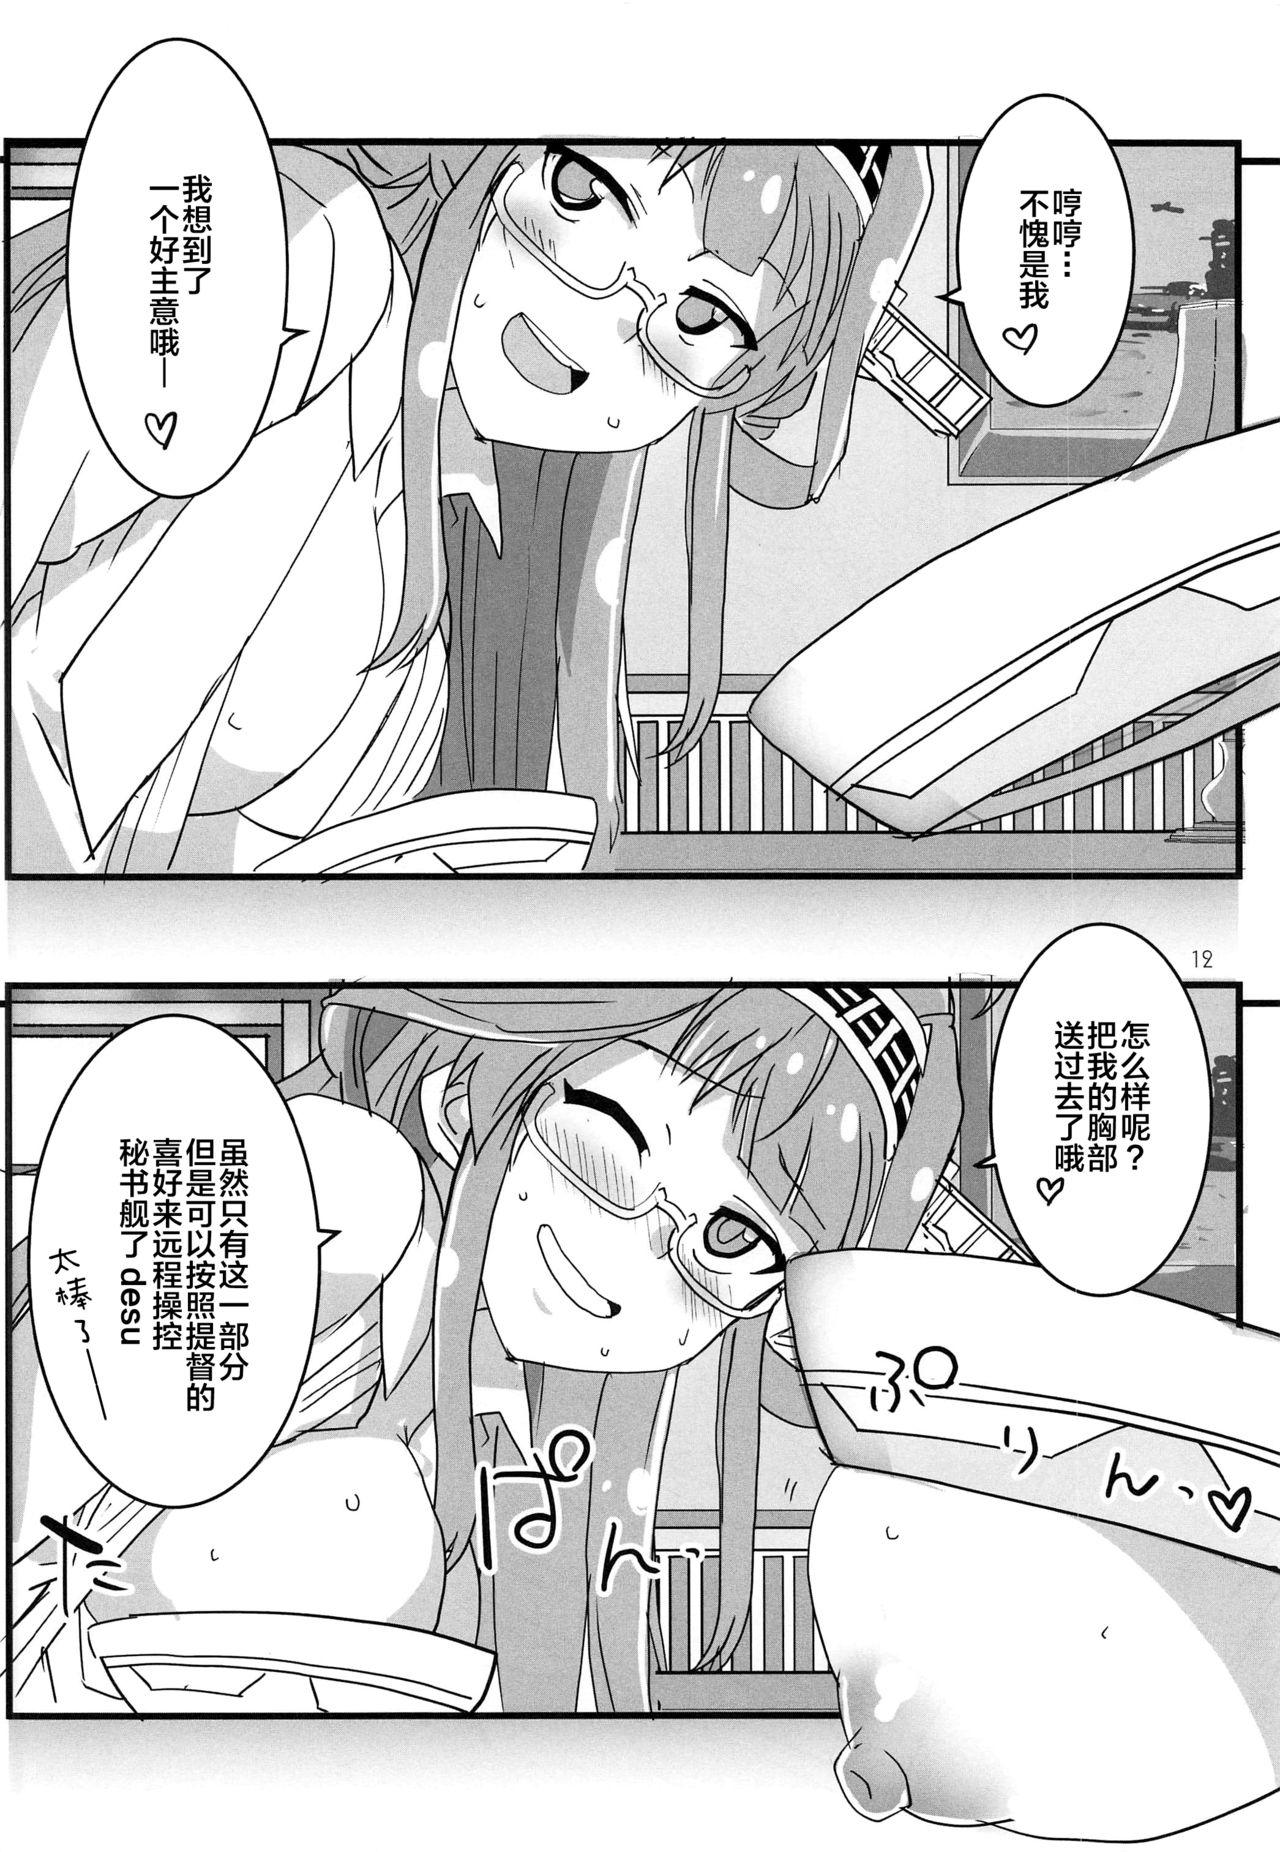 Latex Remote Love - Kantai collection Housewife - Page 11